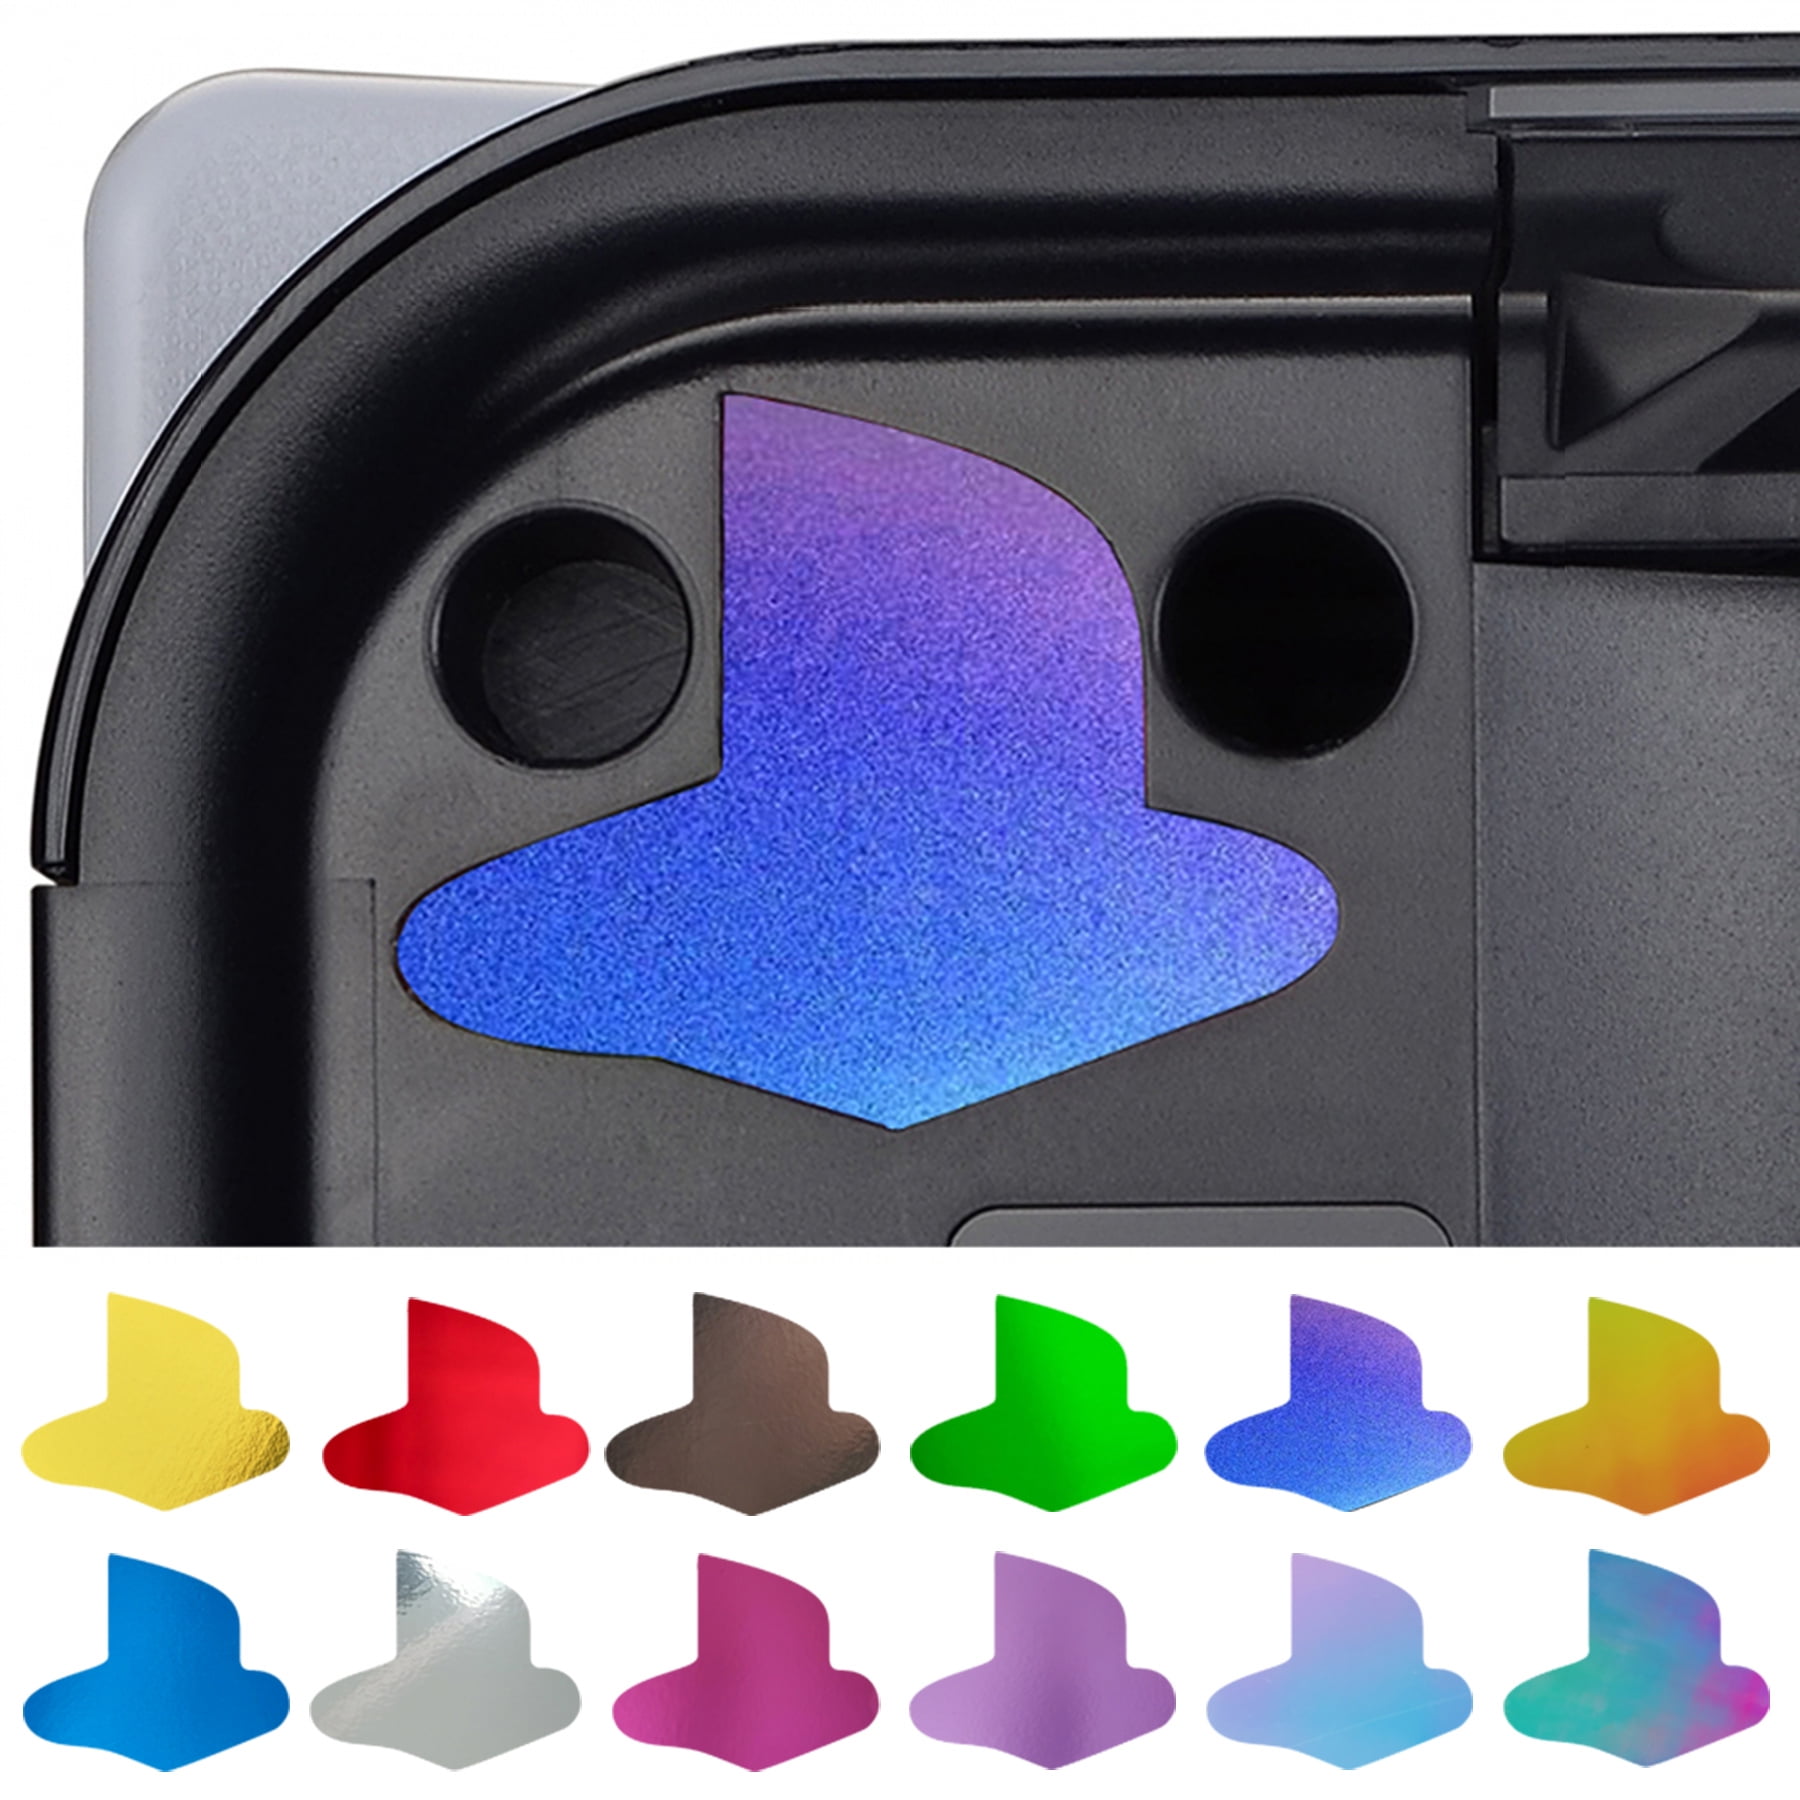 PlayVital Custom Vinyl Decal Skins for PS5 Console, Logo Underlay Sticker  for PS5 Console Disc Version & Digital Version - 8 Chrome Shiny Colors & 4  Gradient Styles 